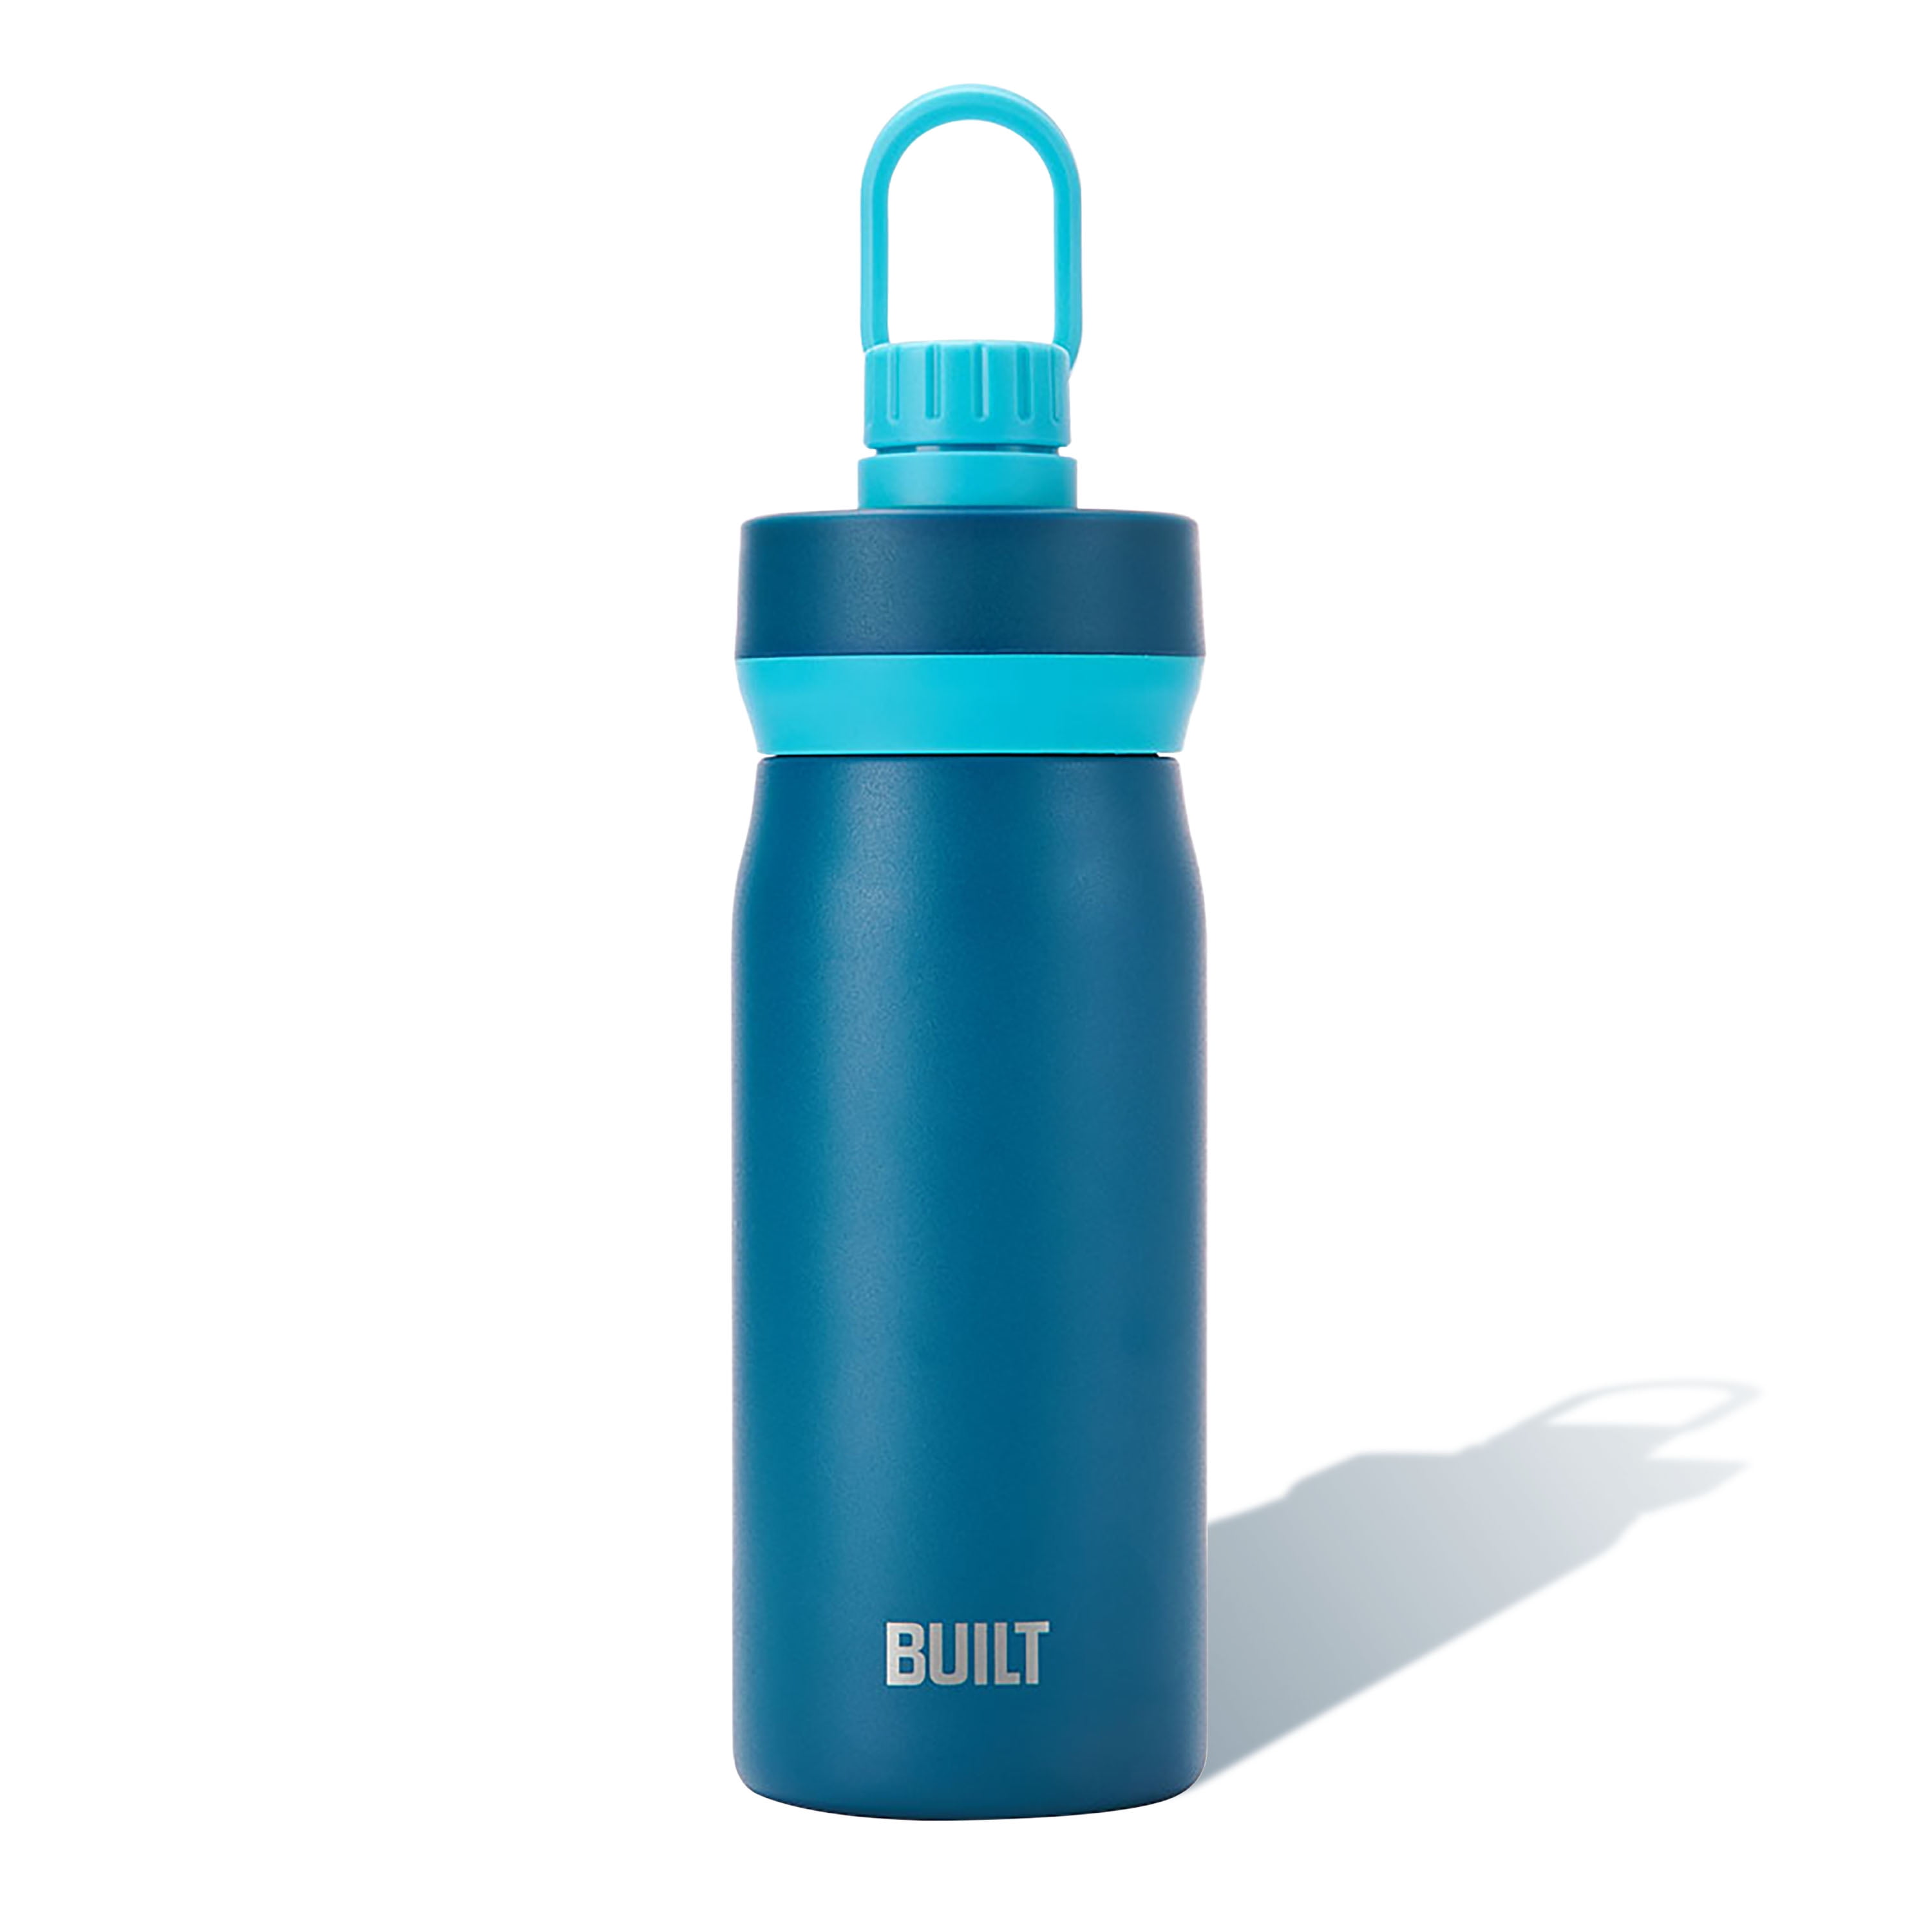 Built Cascade Double Wall Vacuum Insulated Stainless Steel Wide Mouth Water Bottle with Comfort Grip and Straw Lid and Carry Handle, 12 Ounces